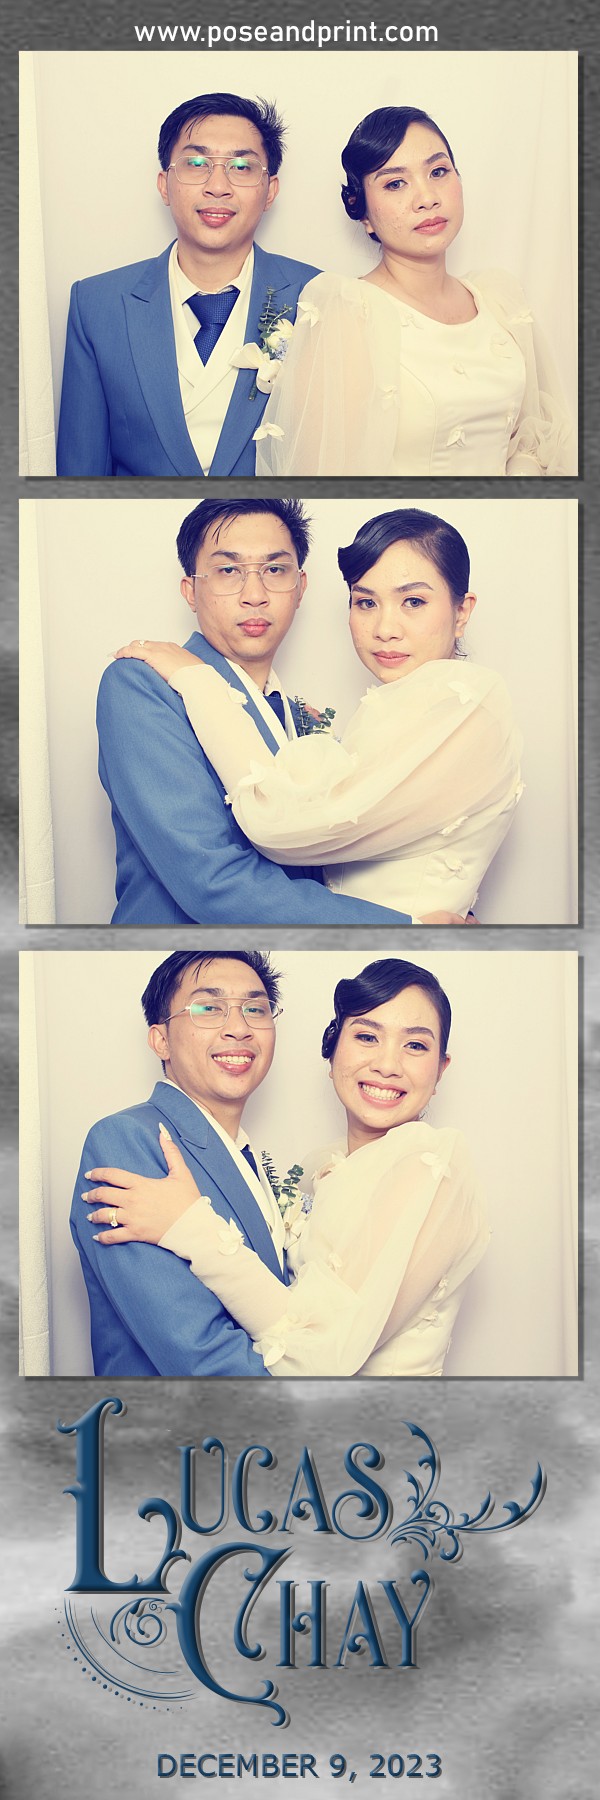 Lucas and Chay’s Wedding – Vintage Booth